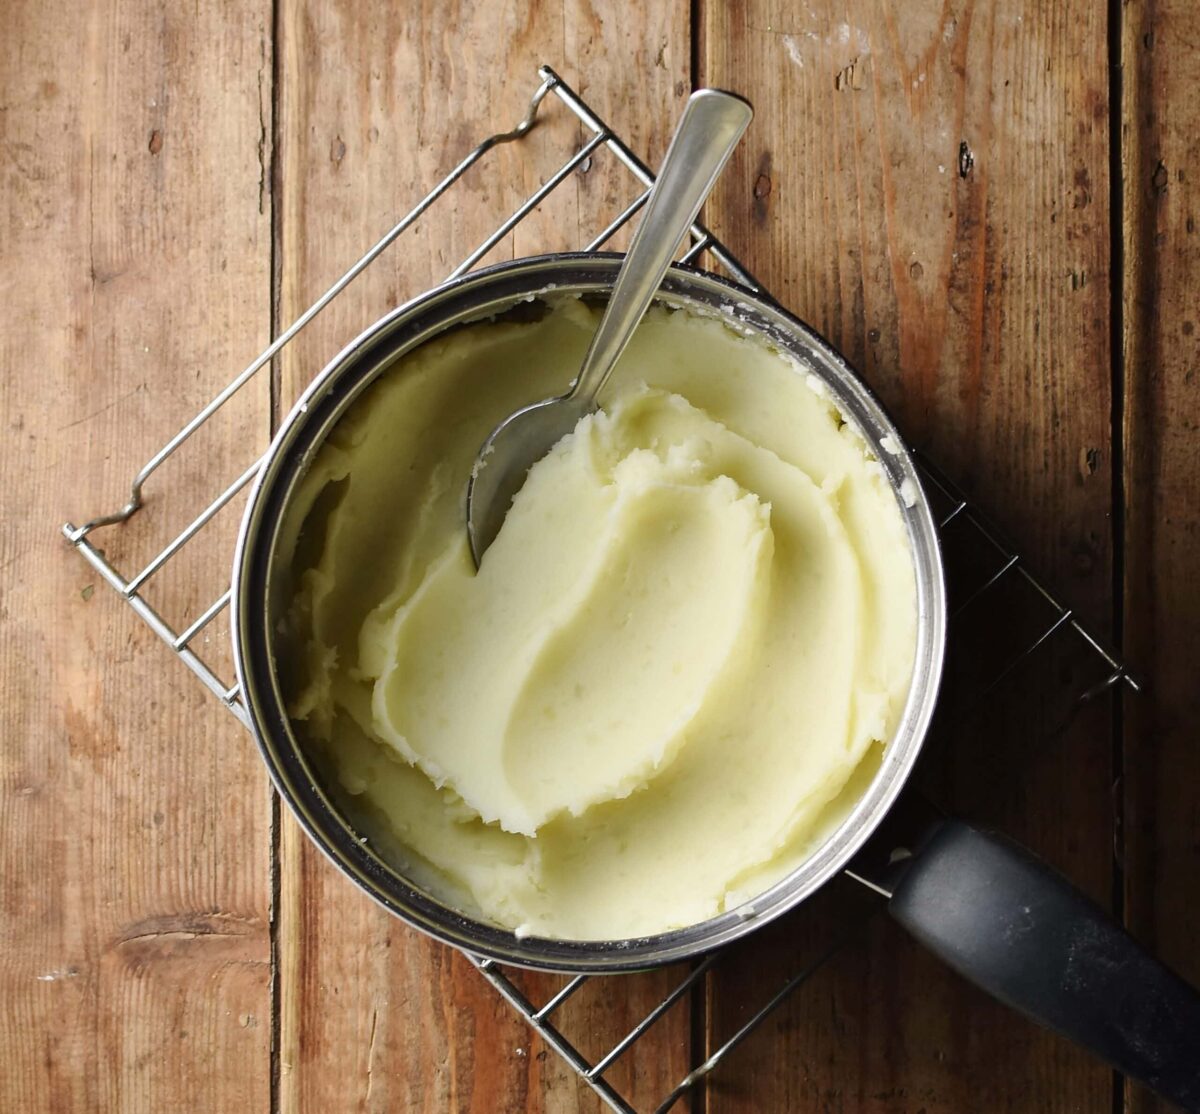 Mashed potatoes with spoon in pot.